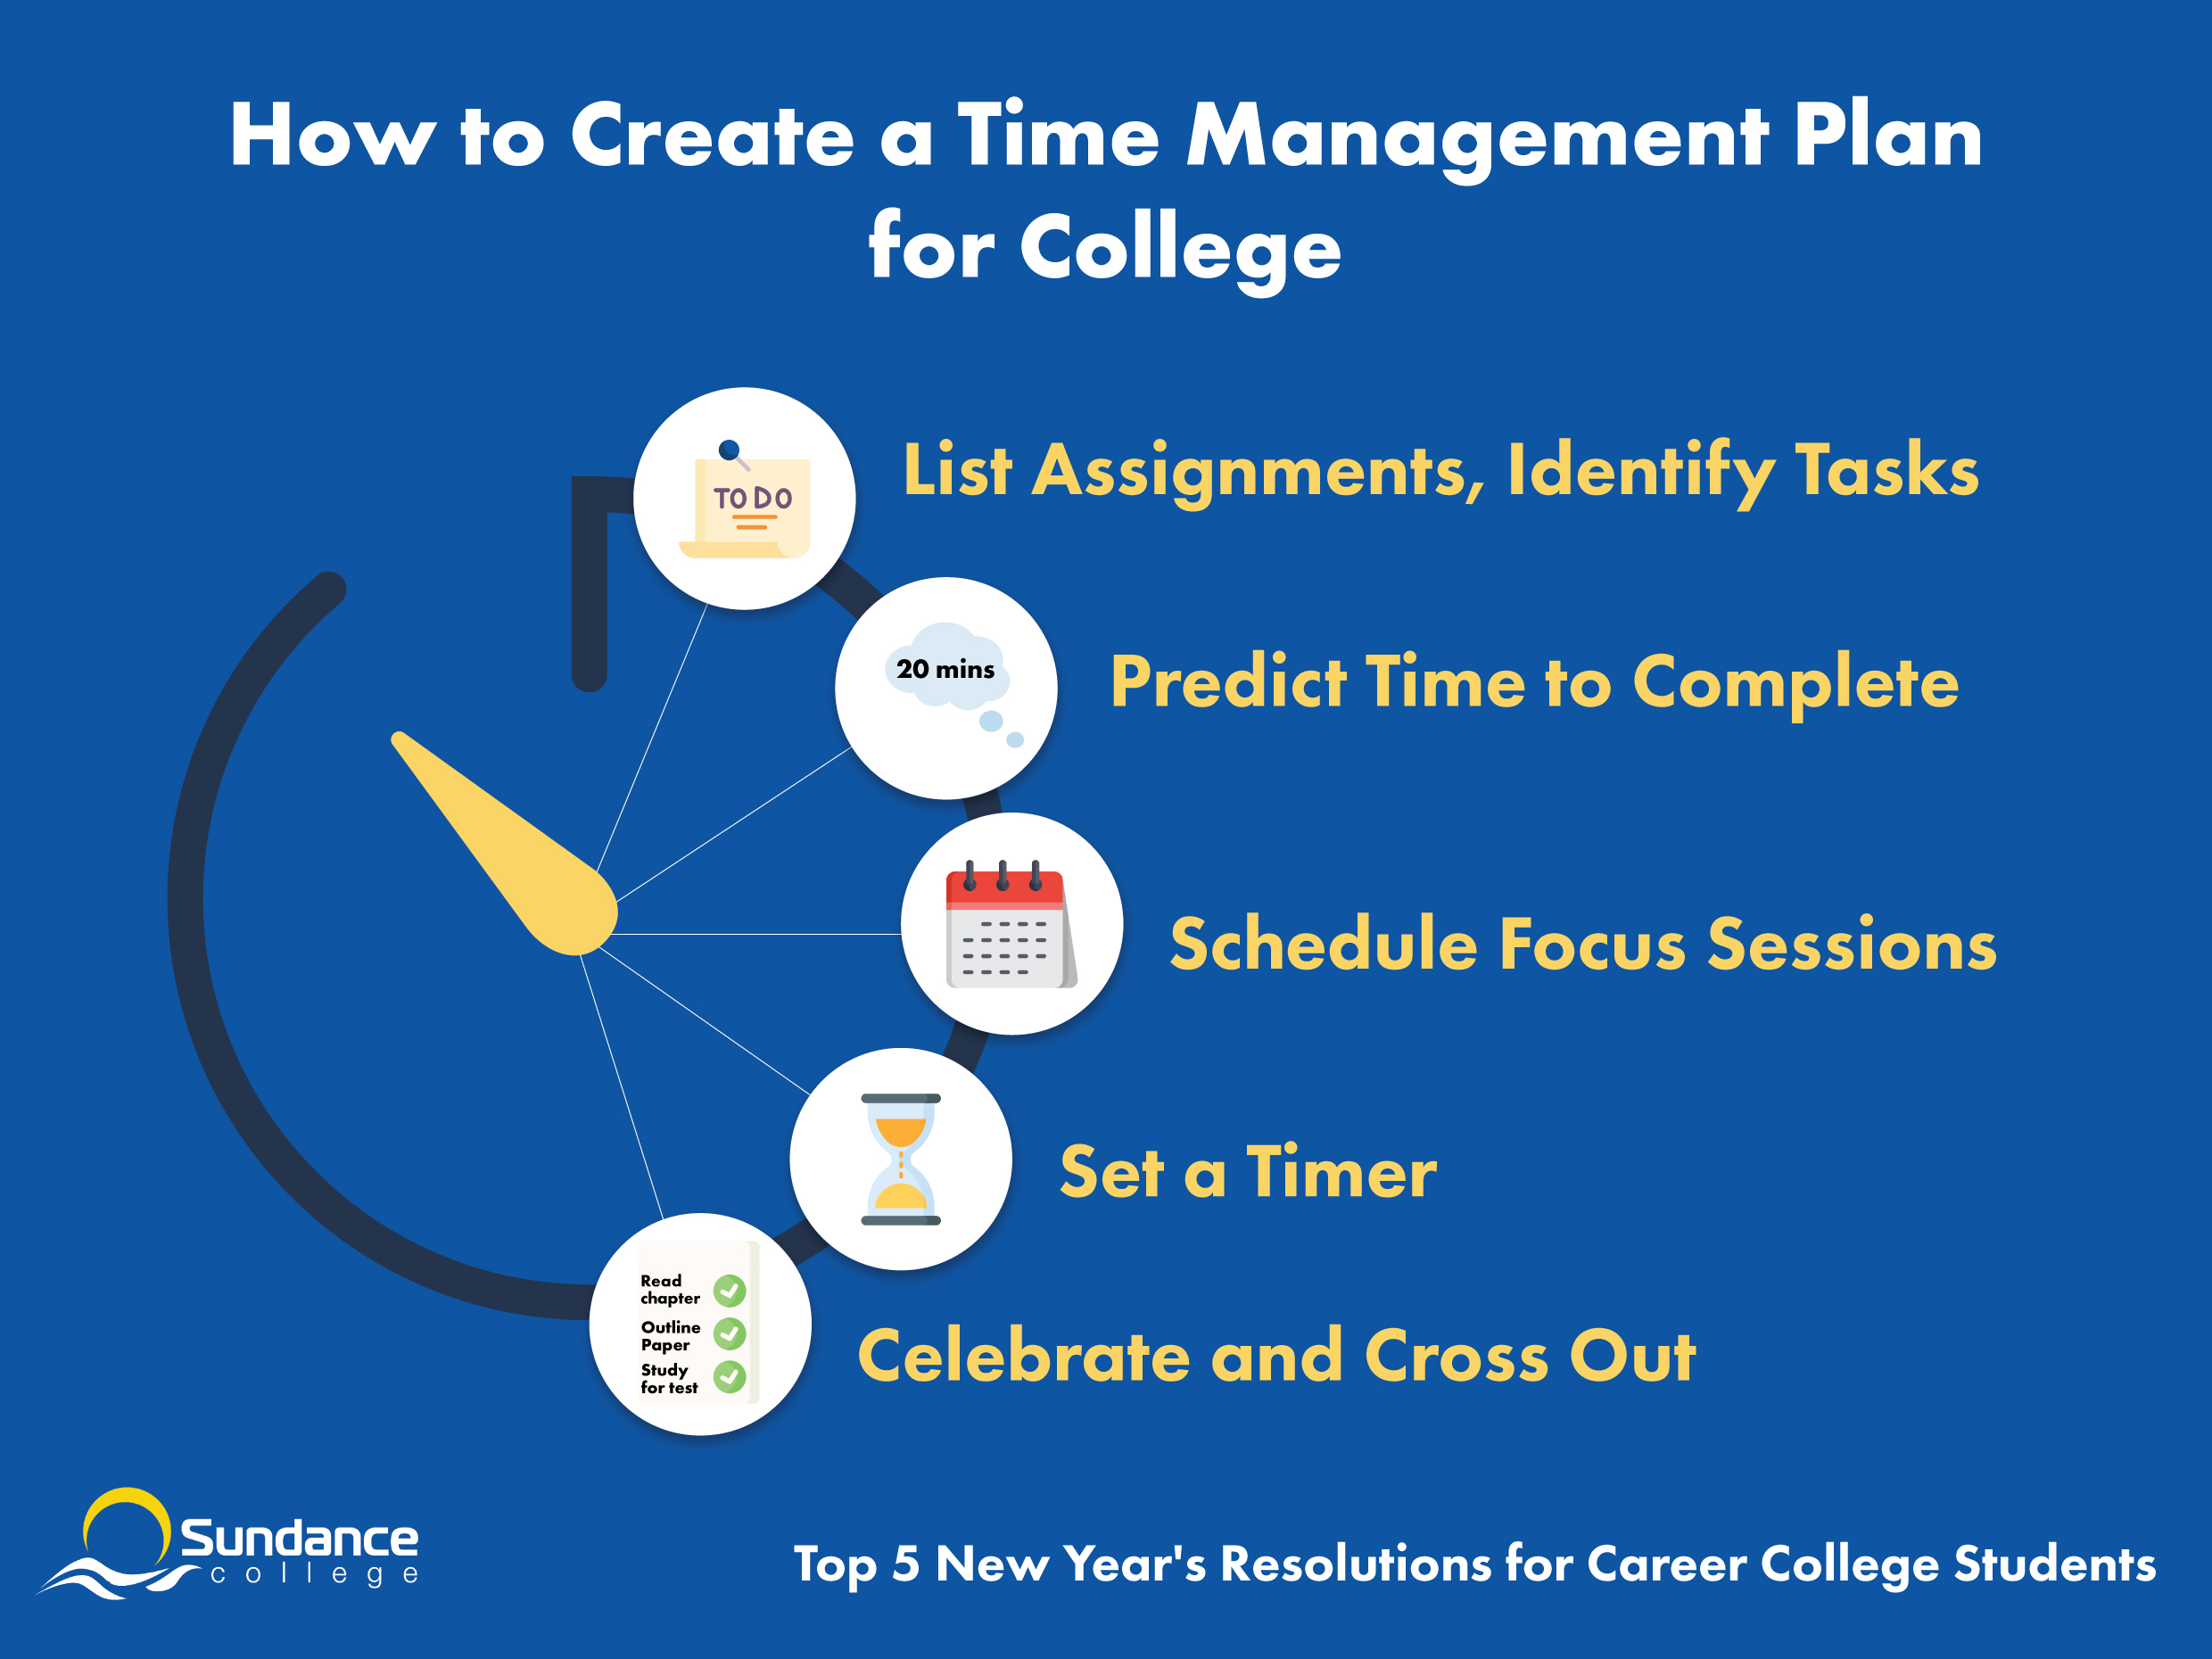 infographic with steps to create time management plan for college: list assignments, predict time to complete, schedule focus sessions, set a timer, celebrate and cross out